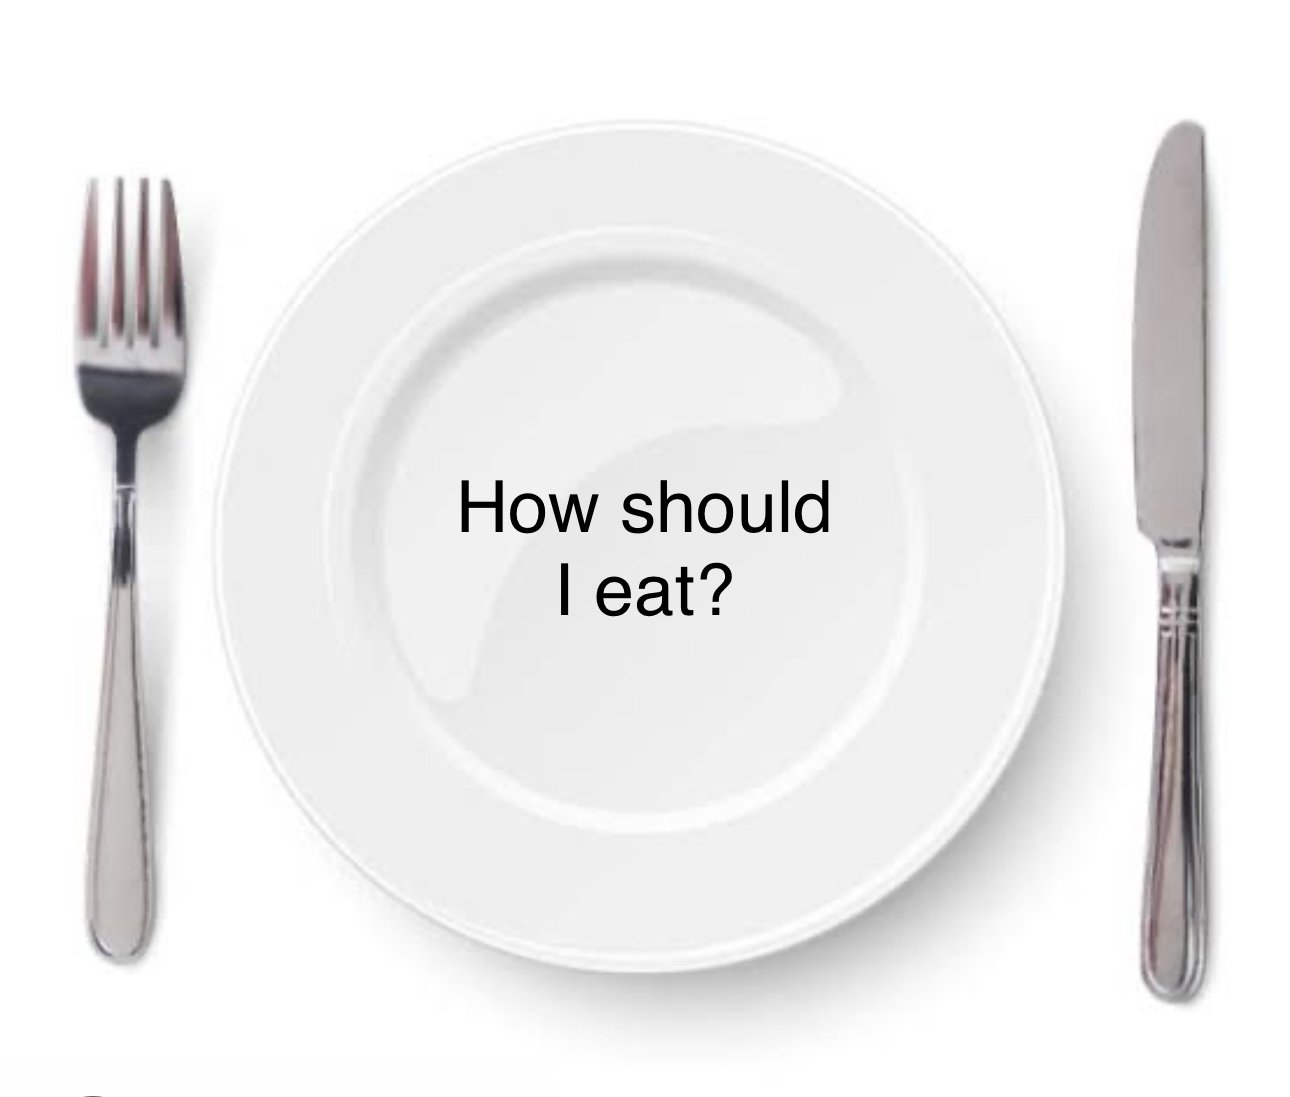 Day 5 - How Should I Eat?